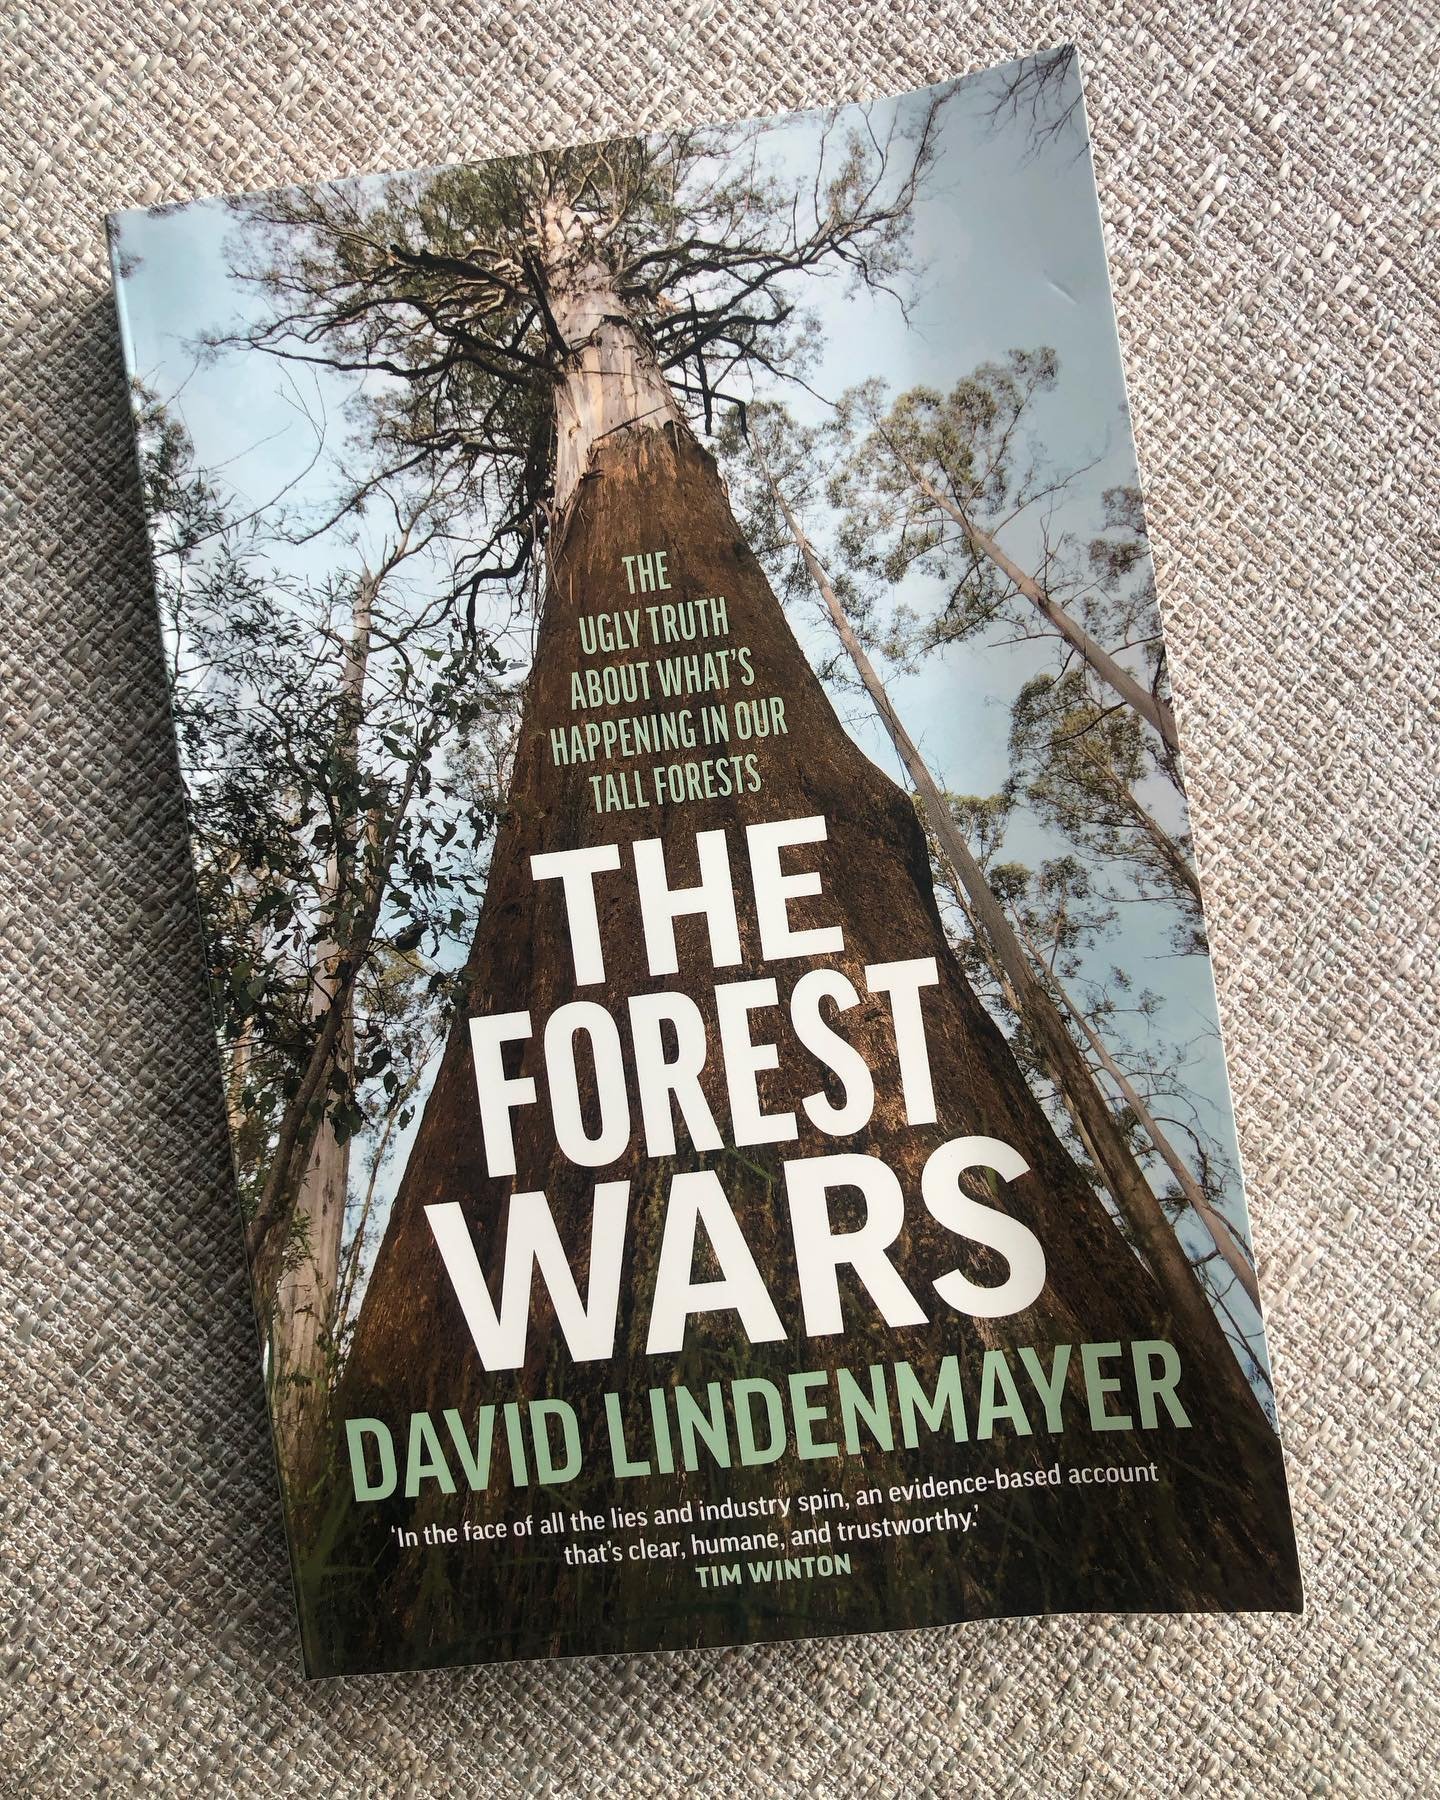 For anyone who has fought the forest wars or who cares for the future of what remains of our tall native forests - this is a MUST READ. David Lindenmayer systematically - and scientifically - exposes every myth the native forest logging industry has 